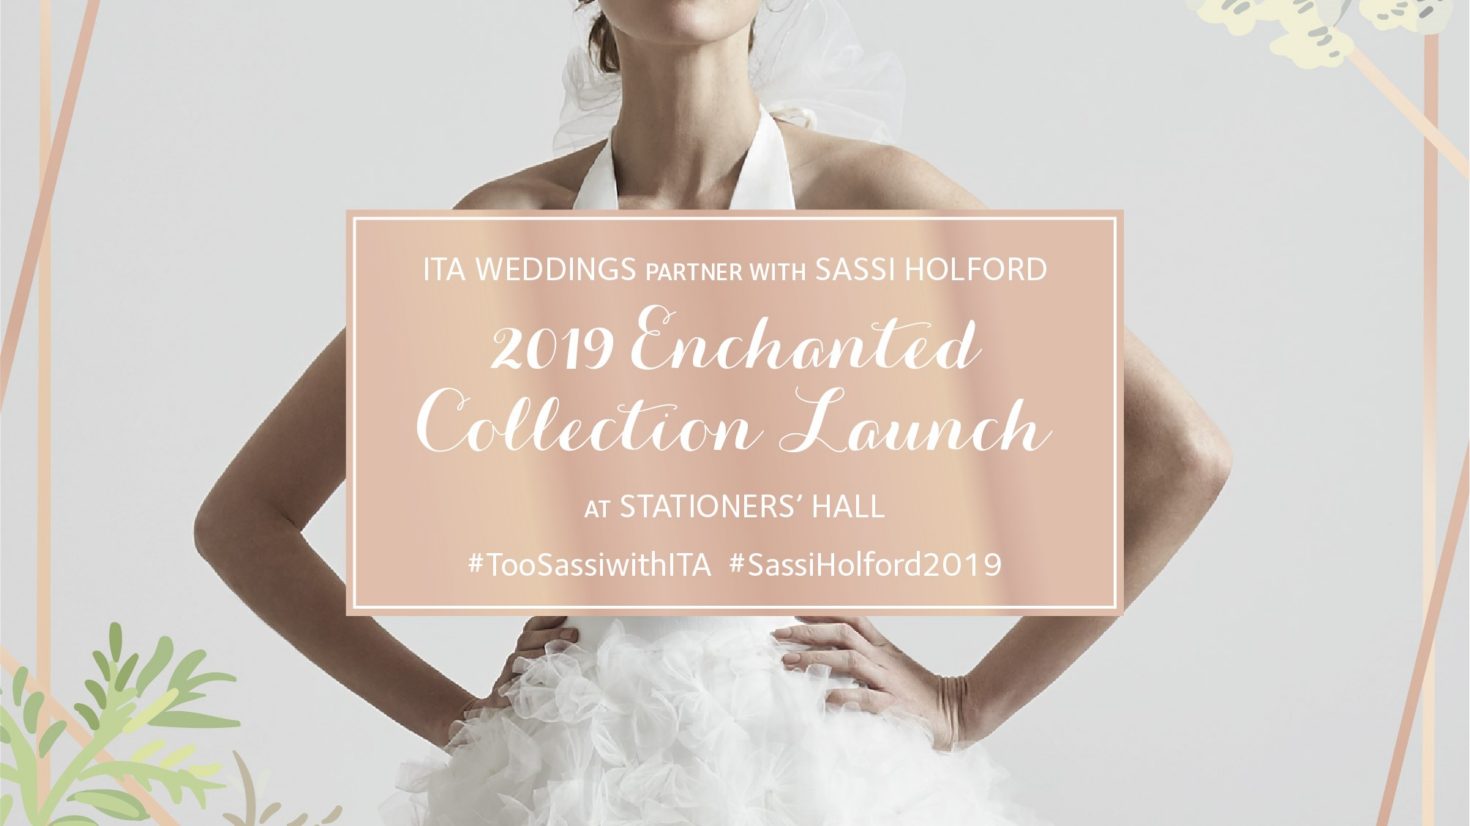 ITA Weddings talks to Sassi Holford about her ‘Enchanted’ 2019 Collection Launch